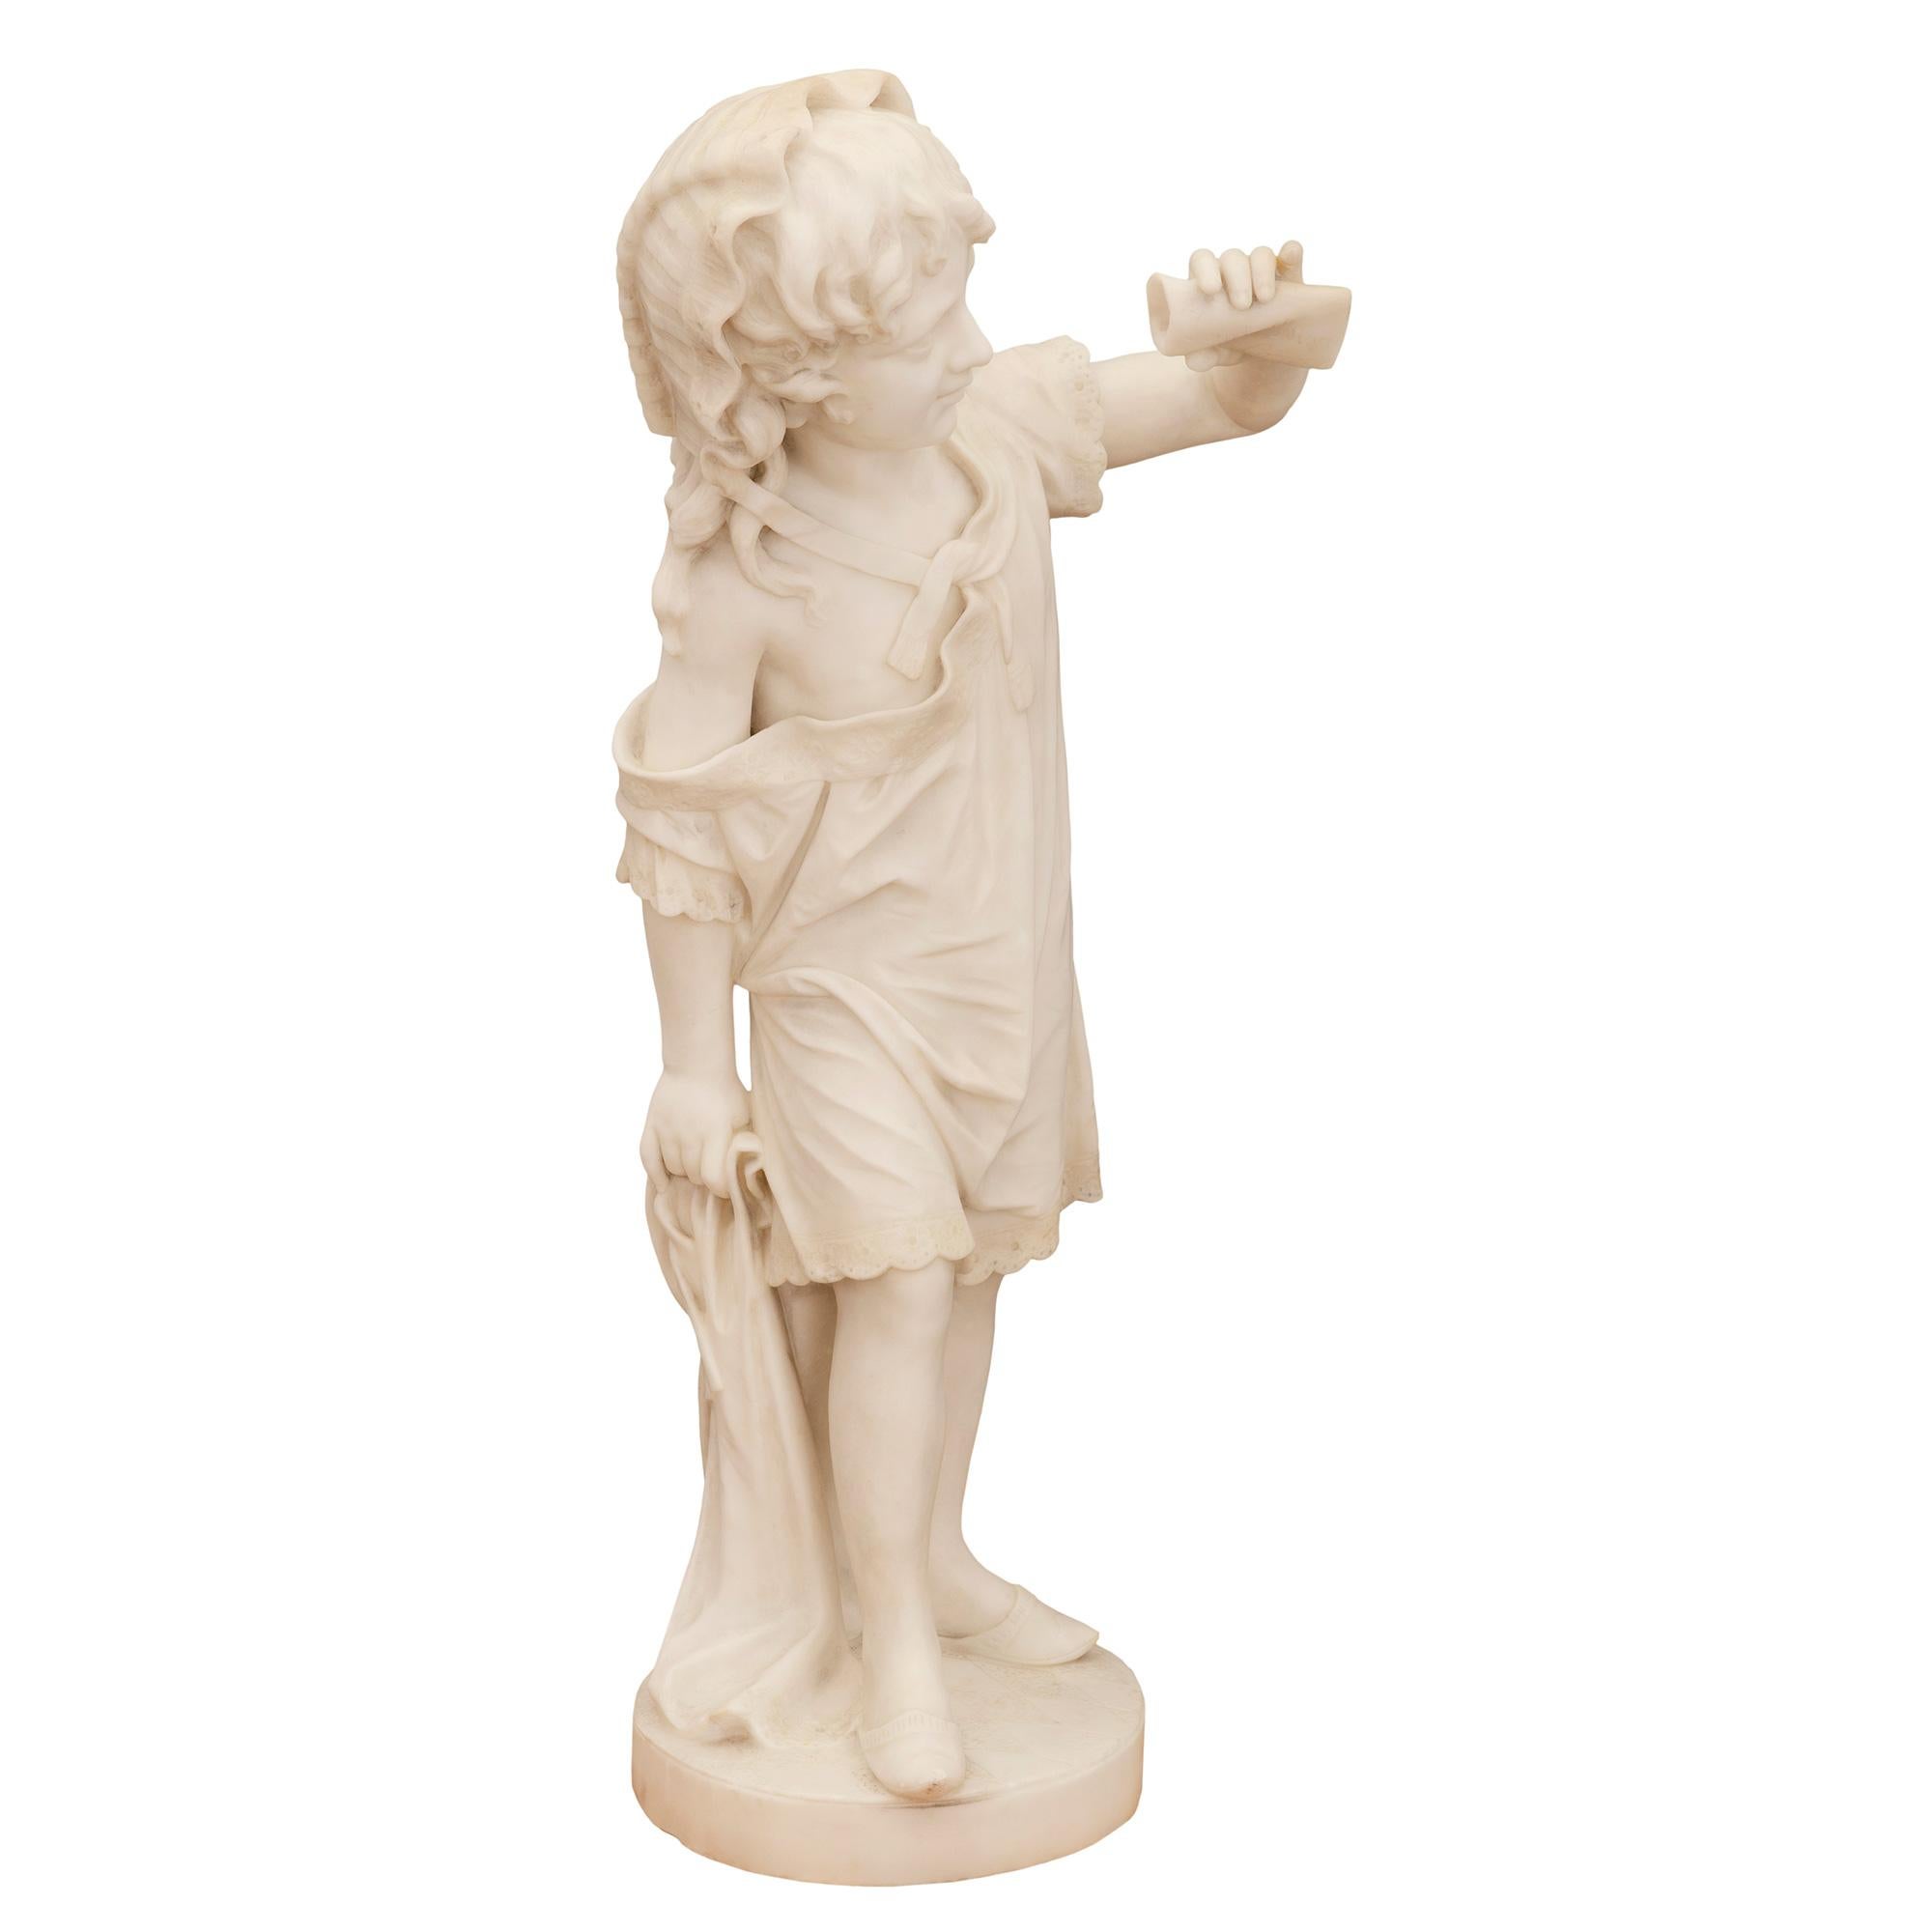 A charming and high quality Italian 19th century white Carrara marble statue of a young girl holding a scroll. The statue is raised by a circular base with a finely sculpted diamond shaped ground design. The adorable young girl is dressed in a